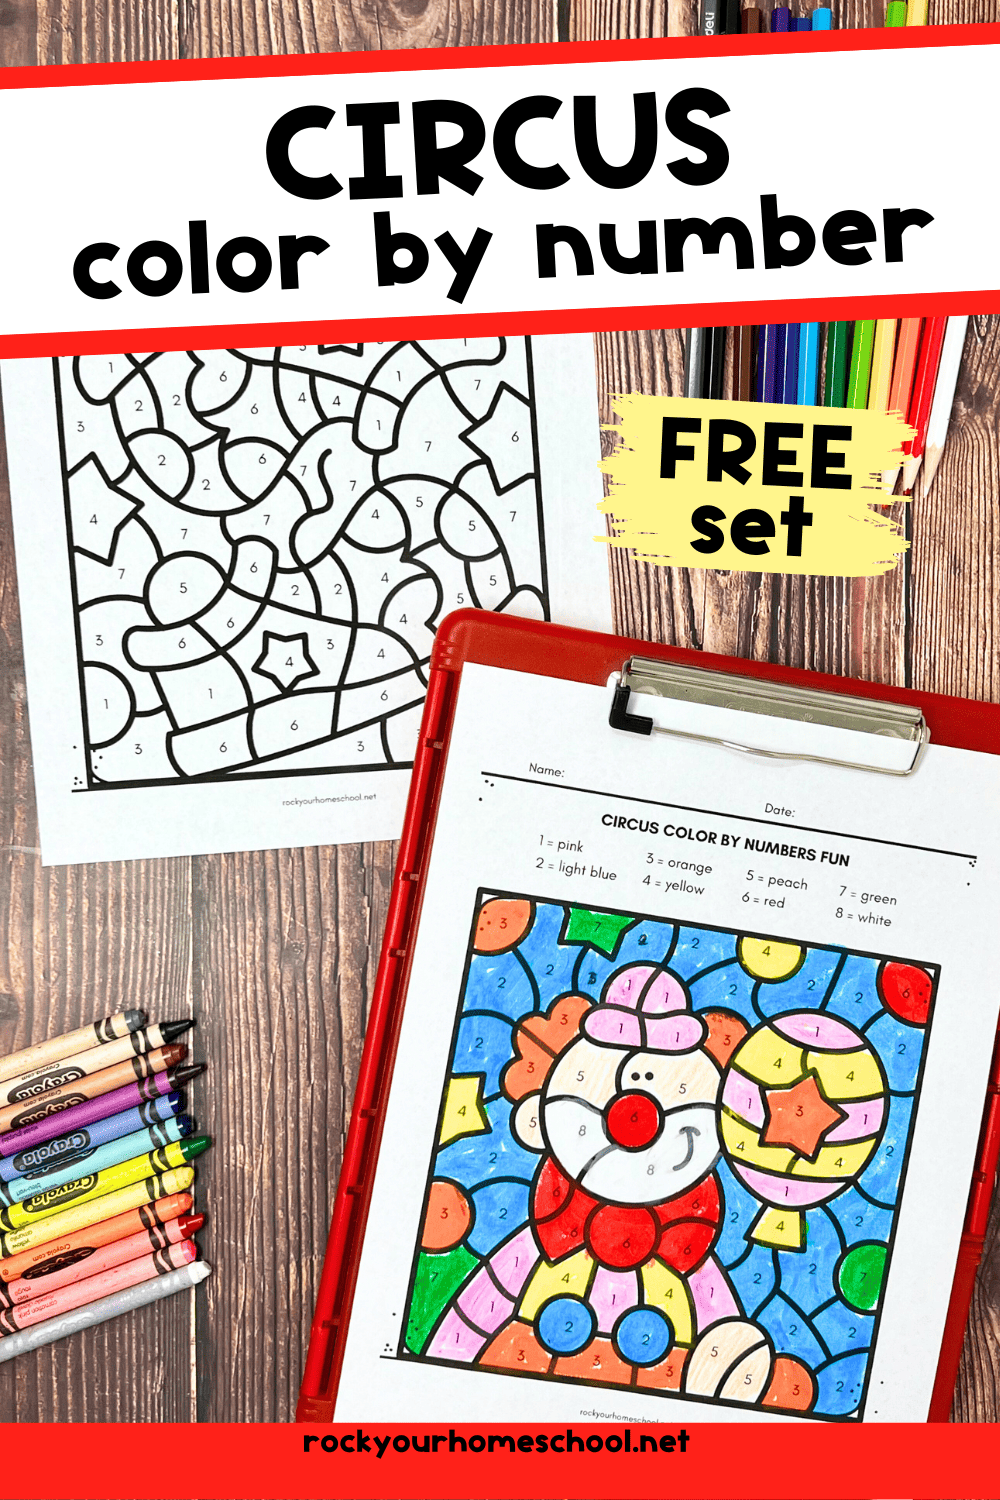 Circus Color by Number Activities Your Kids Will Love (Free)